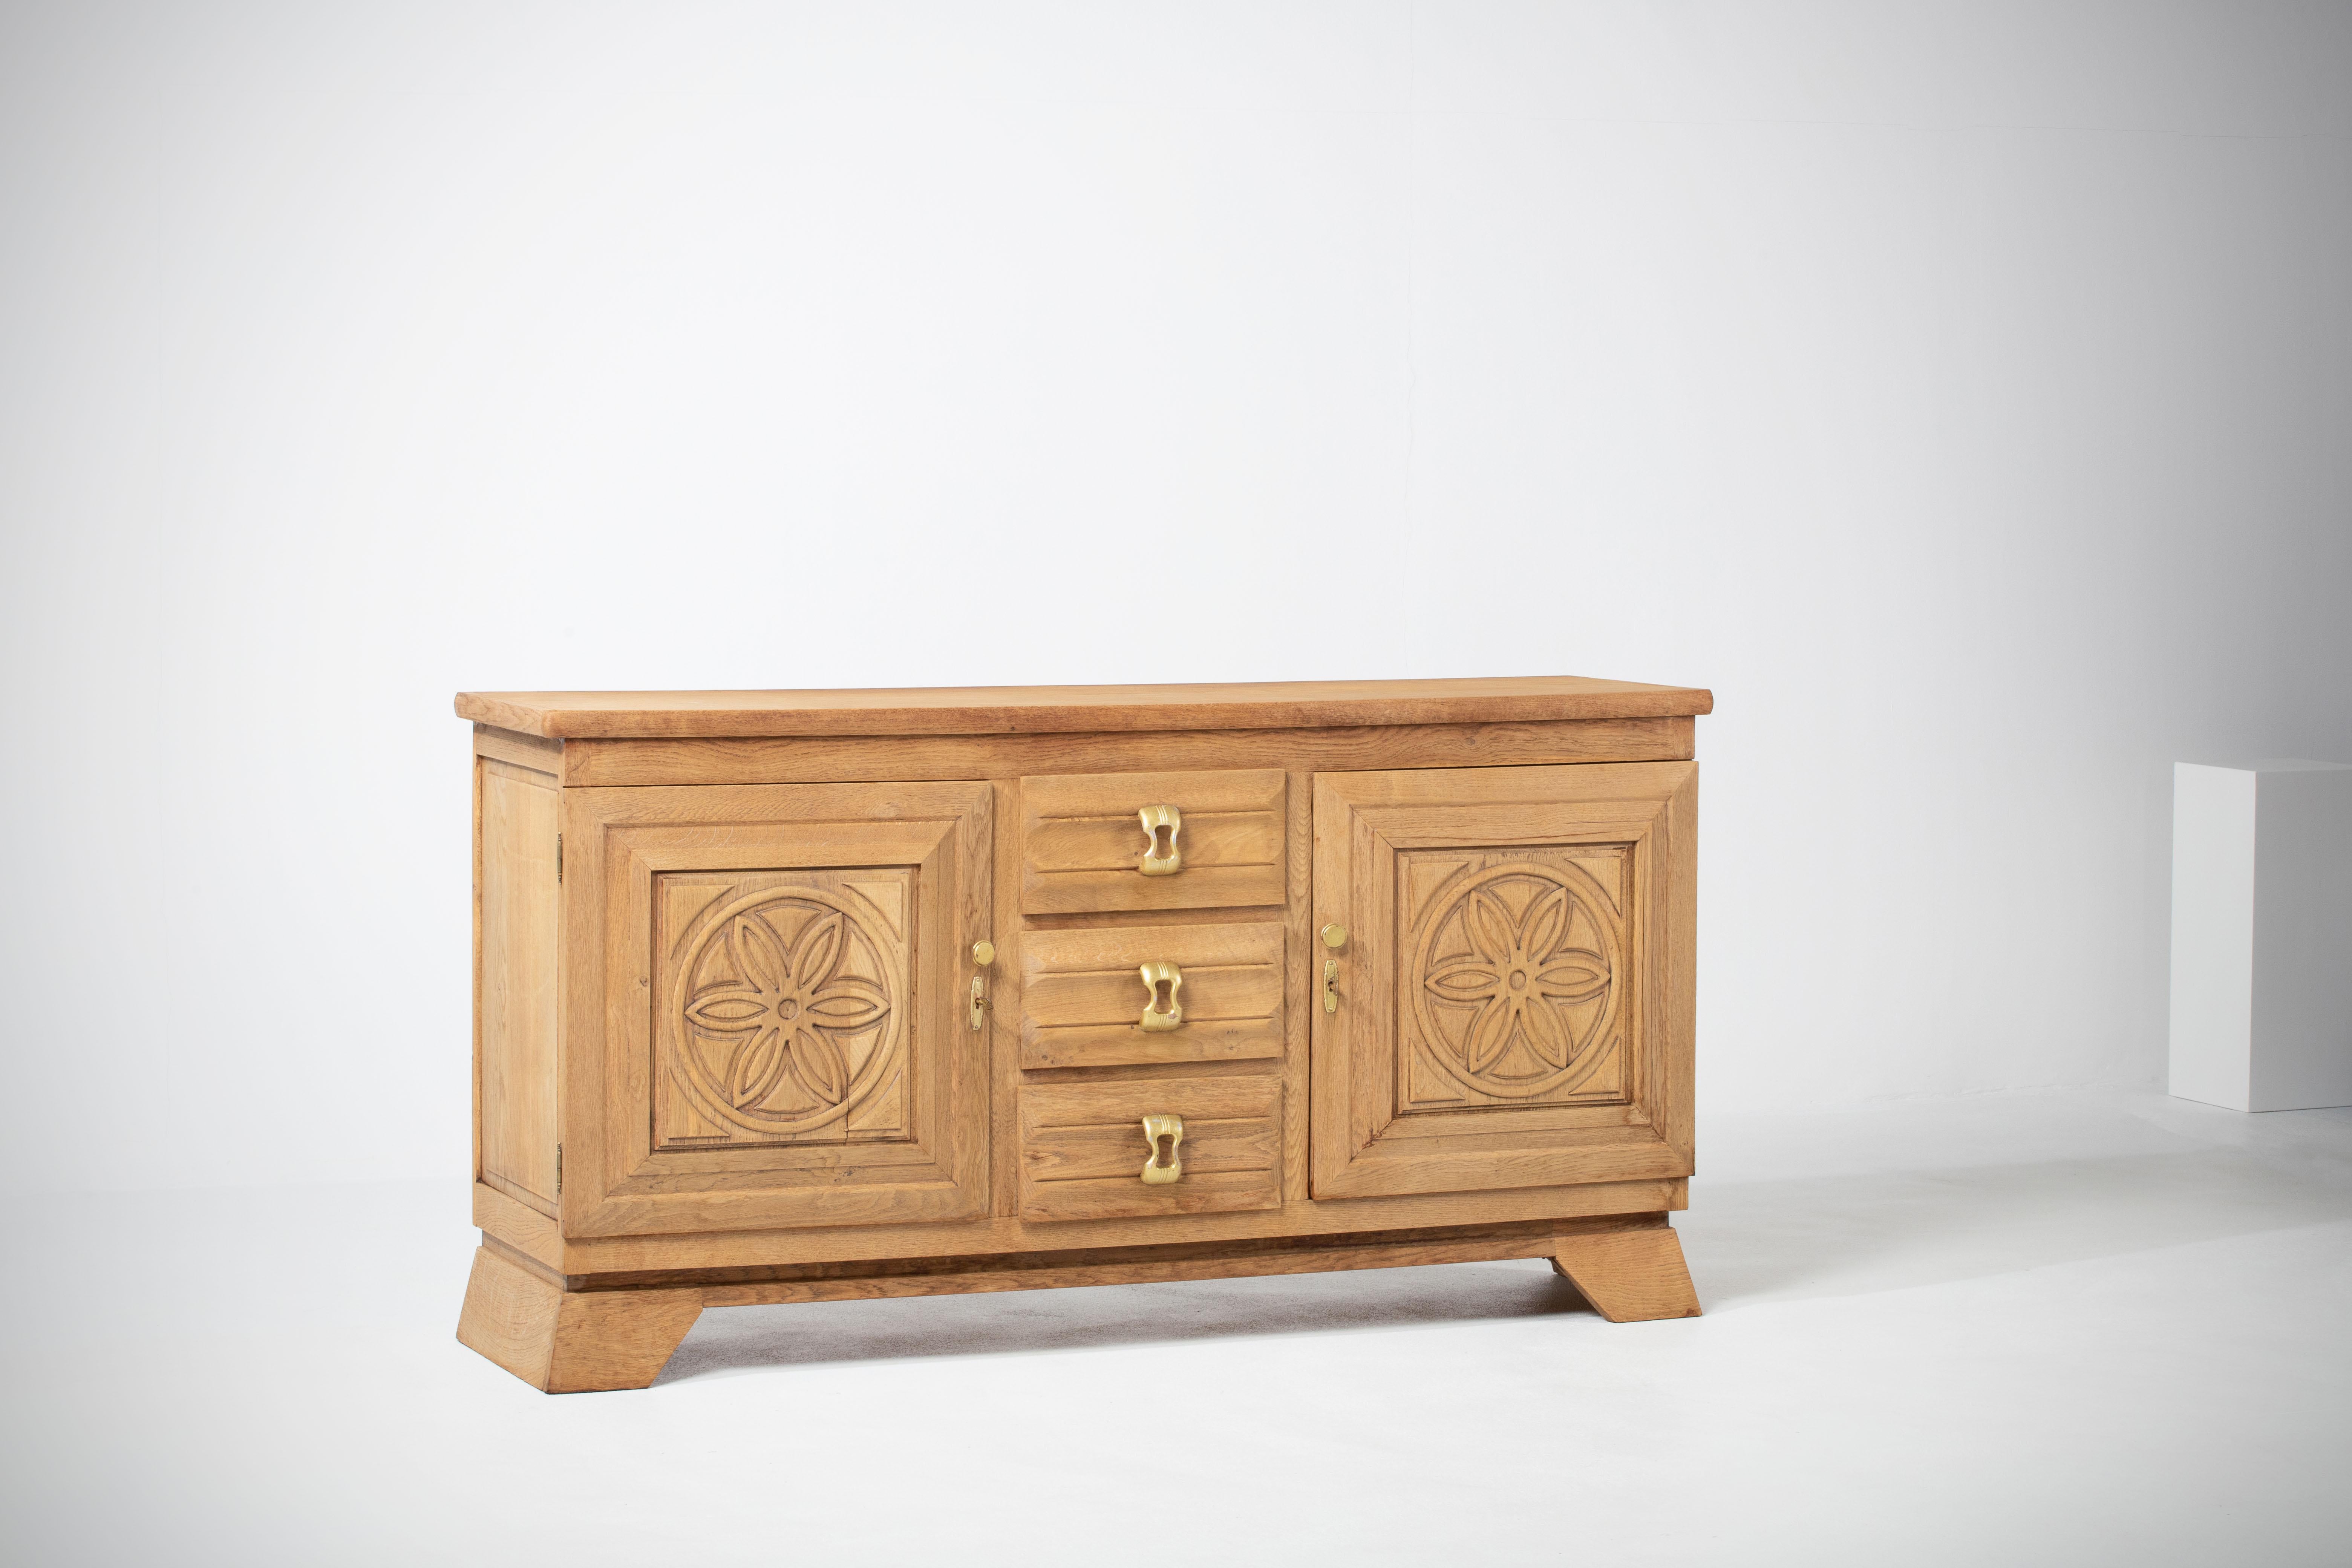 Mid-20th Century Natural Oak Credenza, France, 1940s For Sale